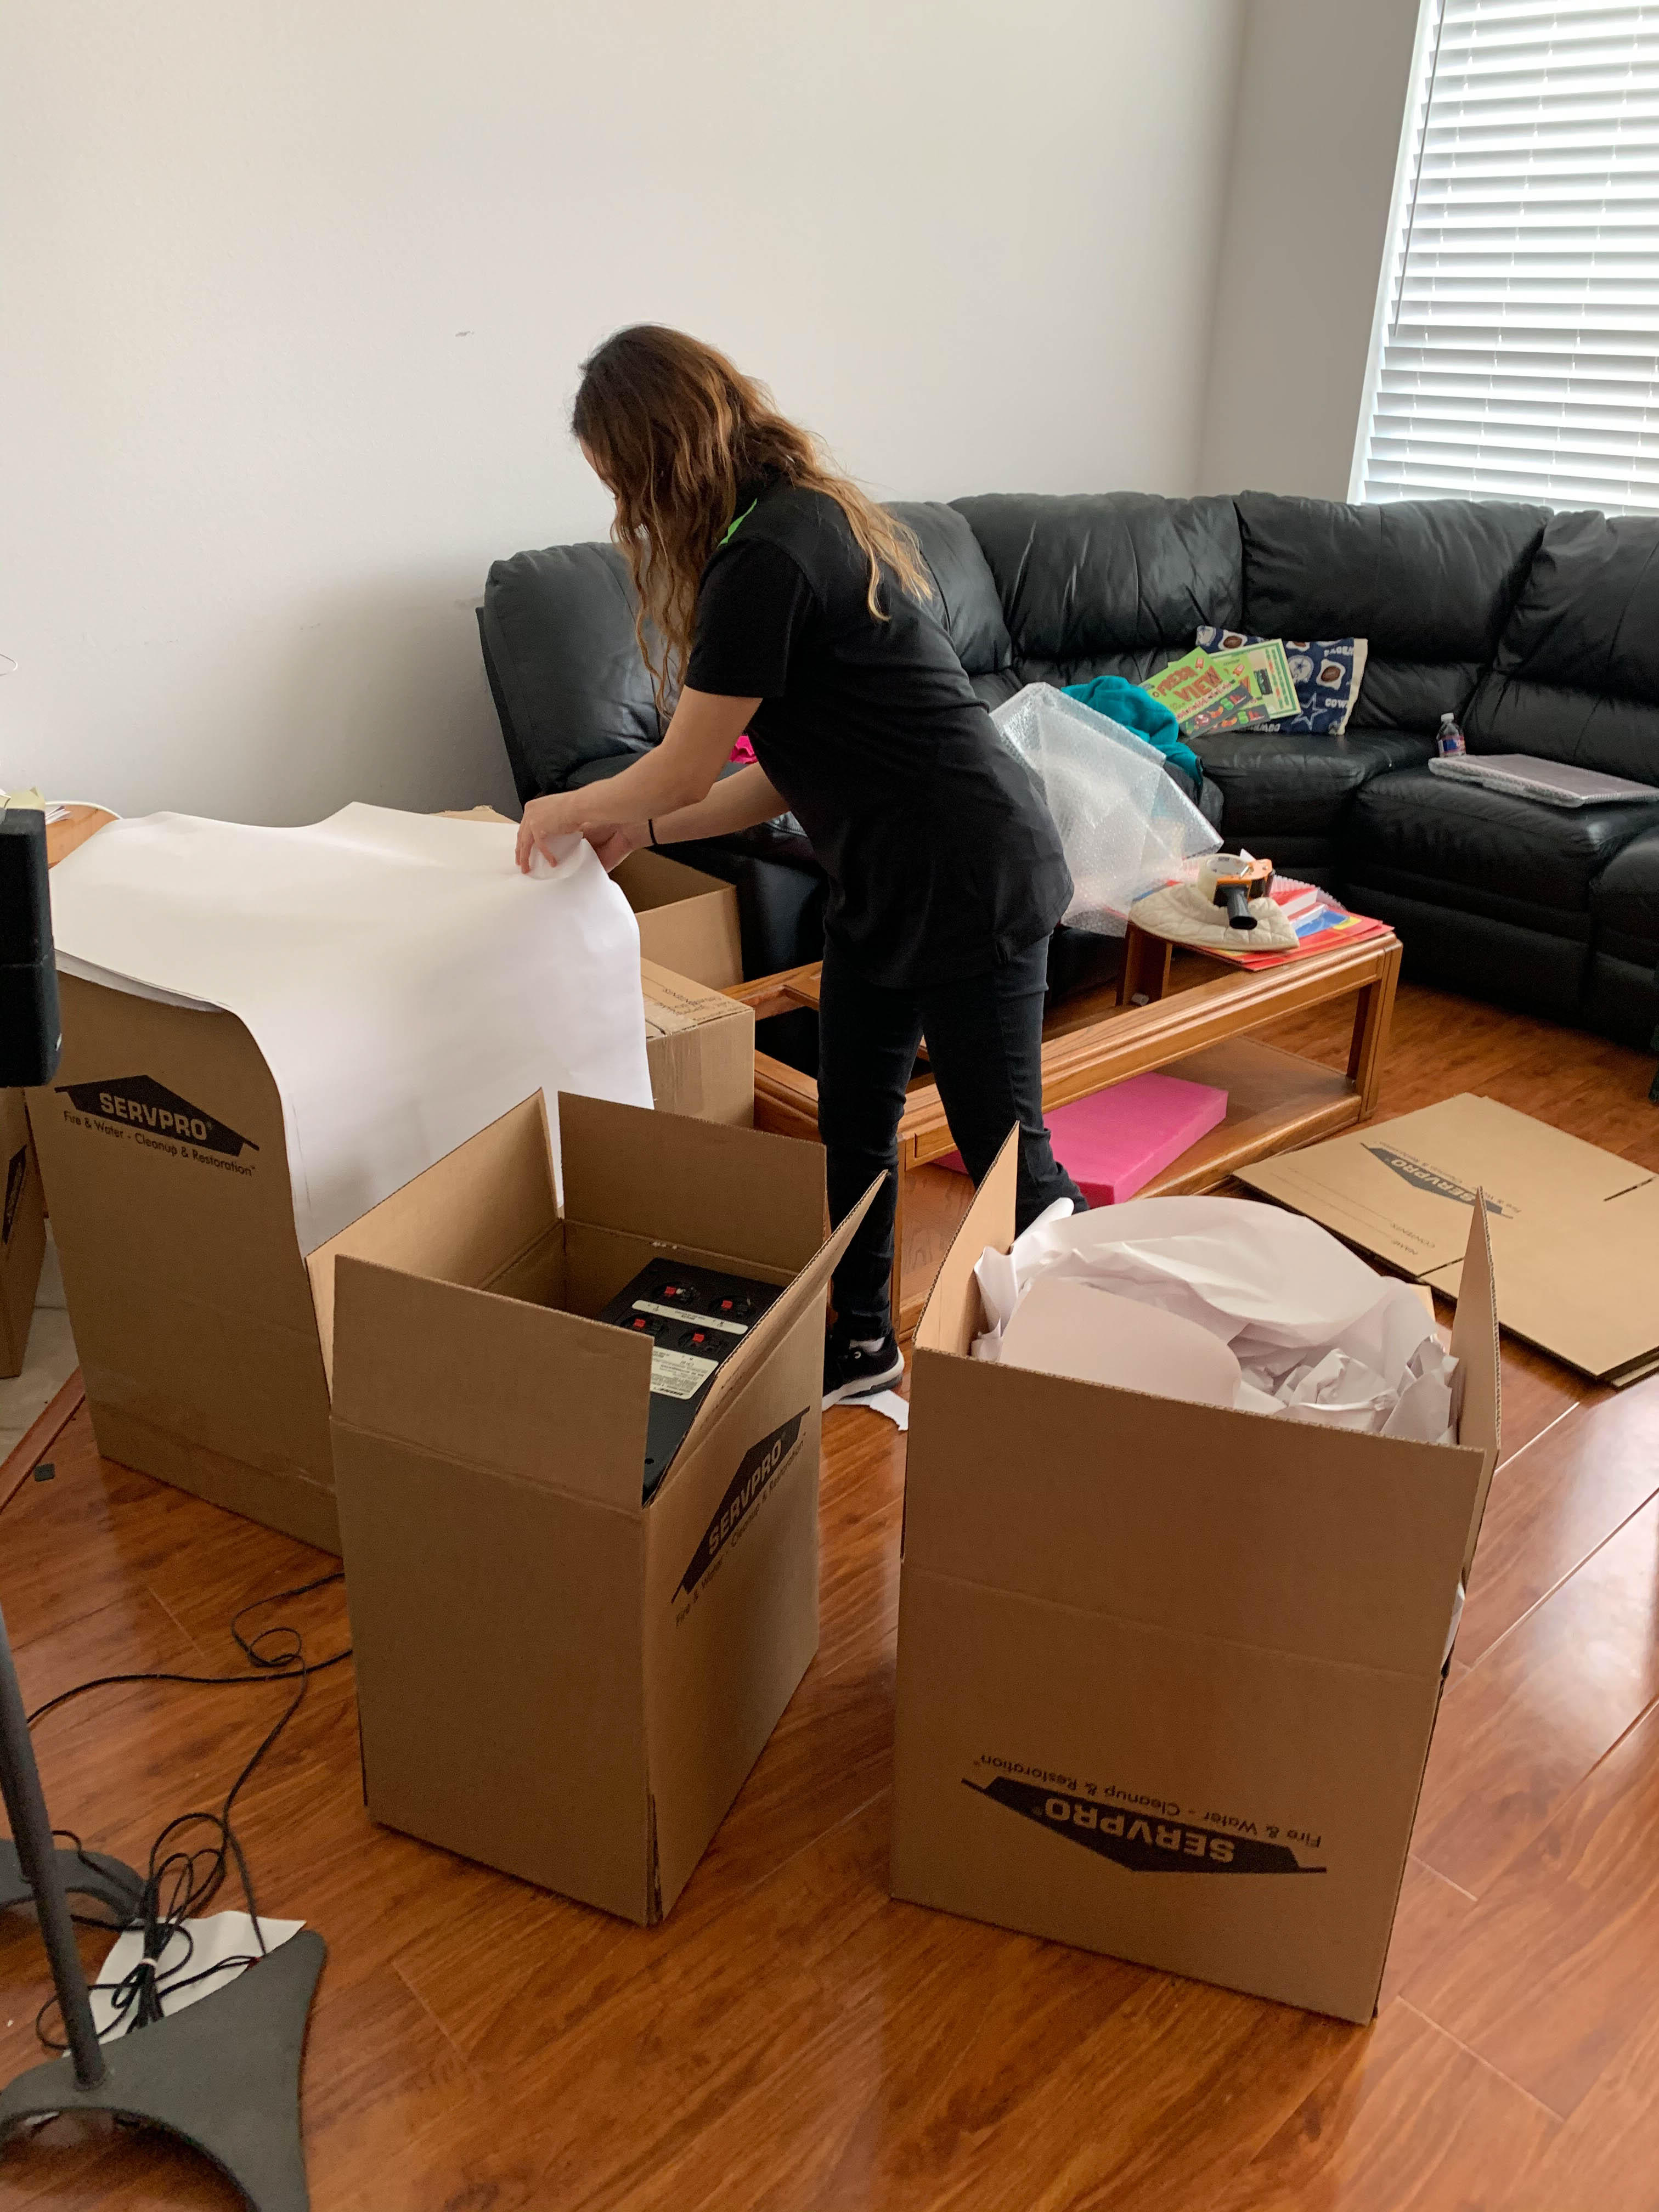 If your home requires extensive restoration or cleaning, SERVPRO of South Garland can conduct an organized, efficient move-out of the affected area.